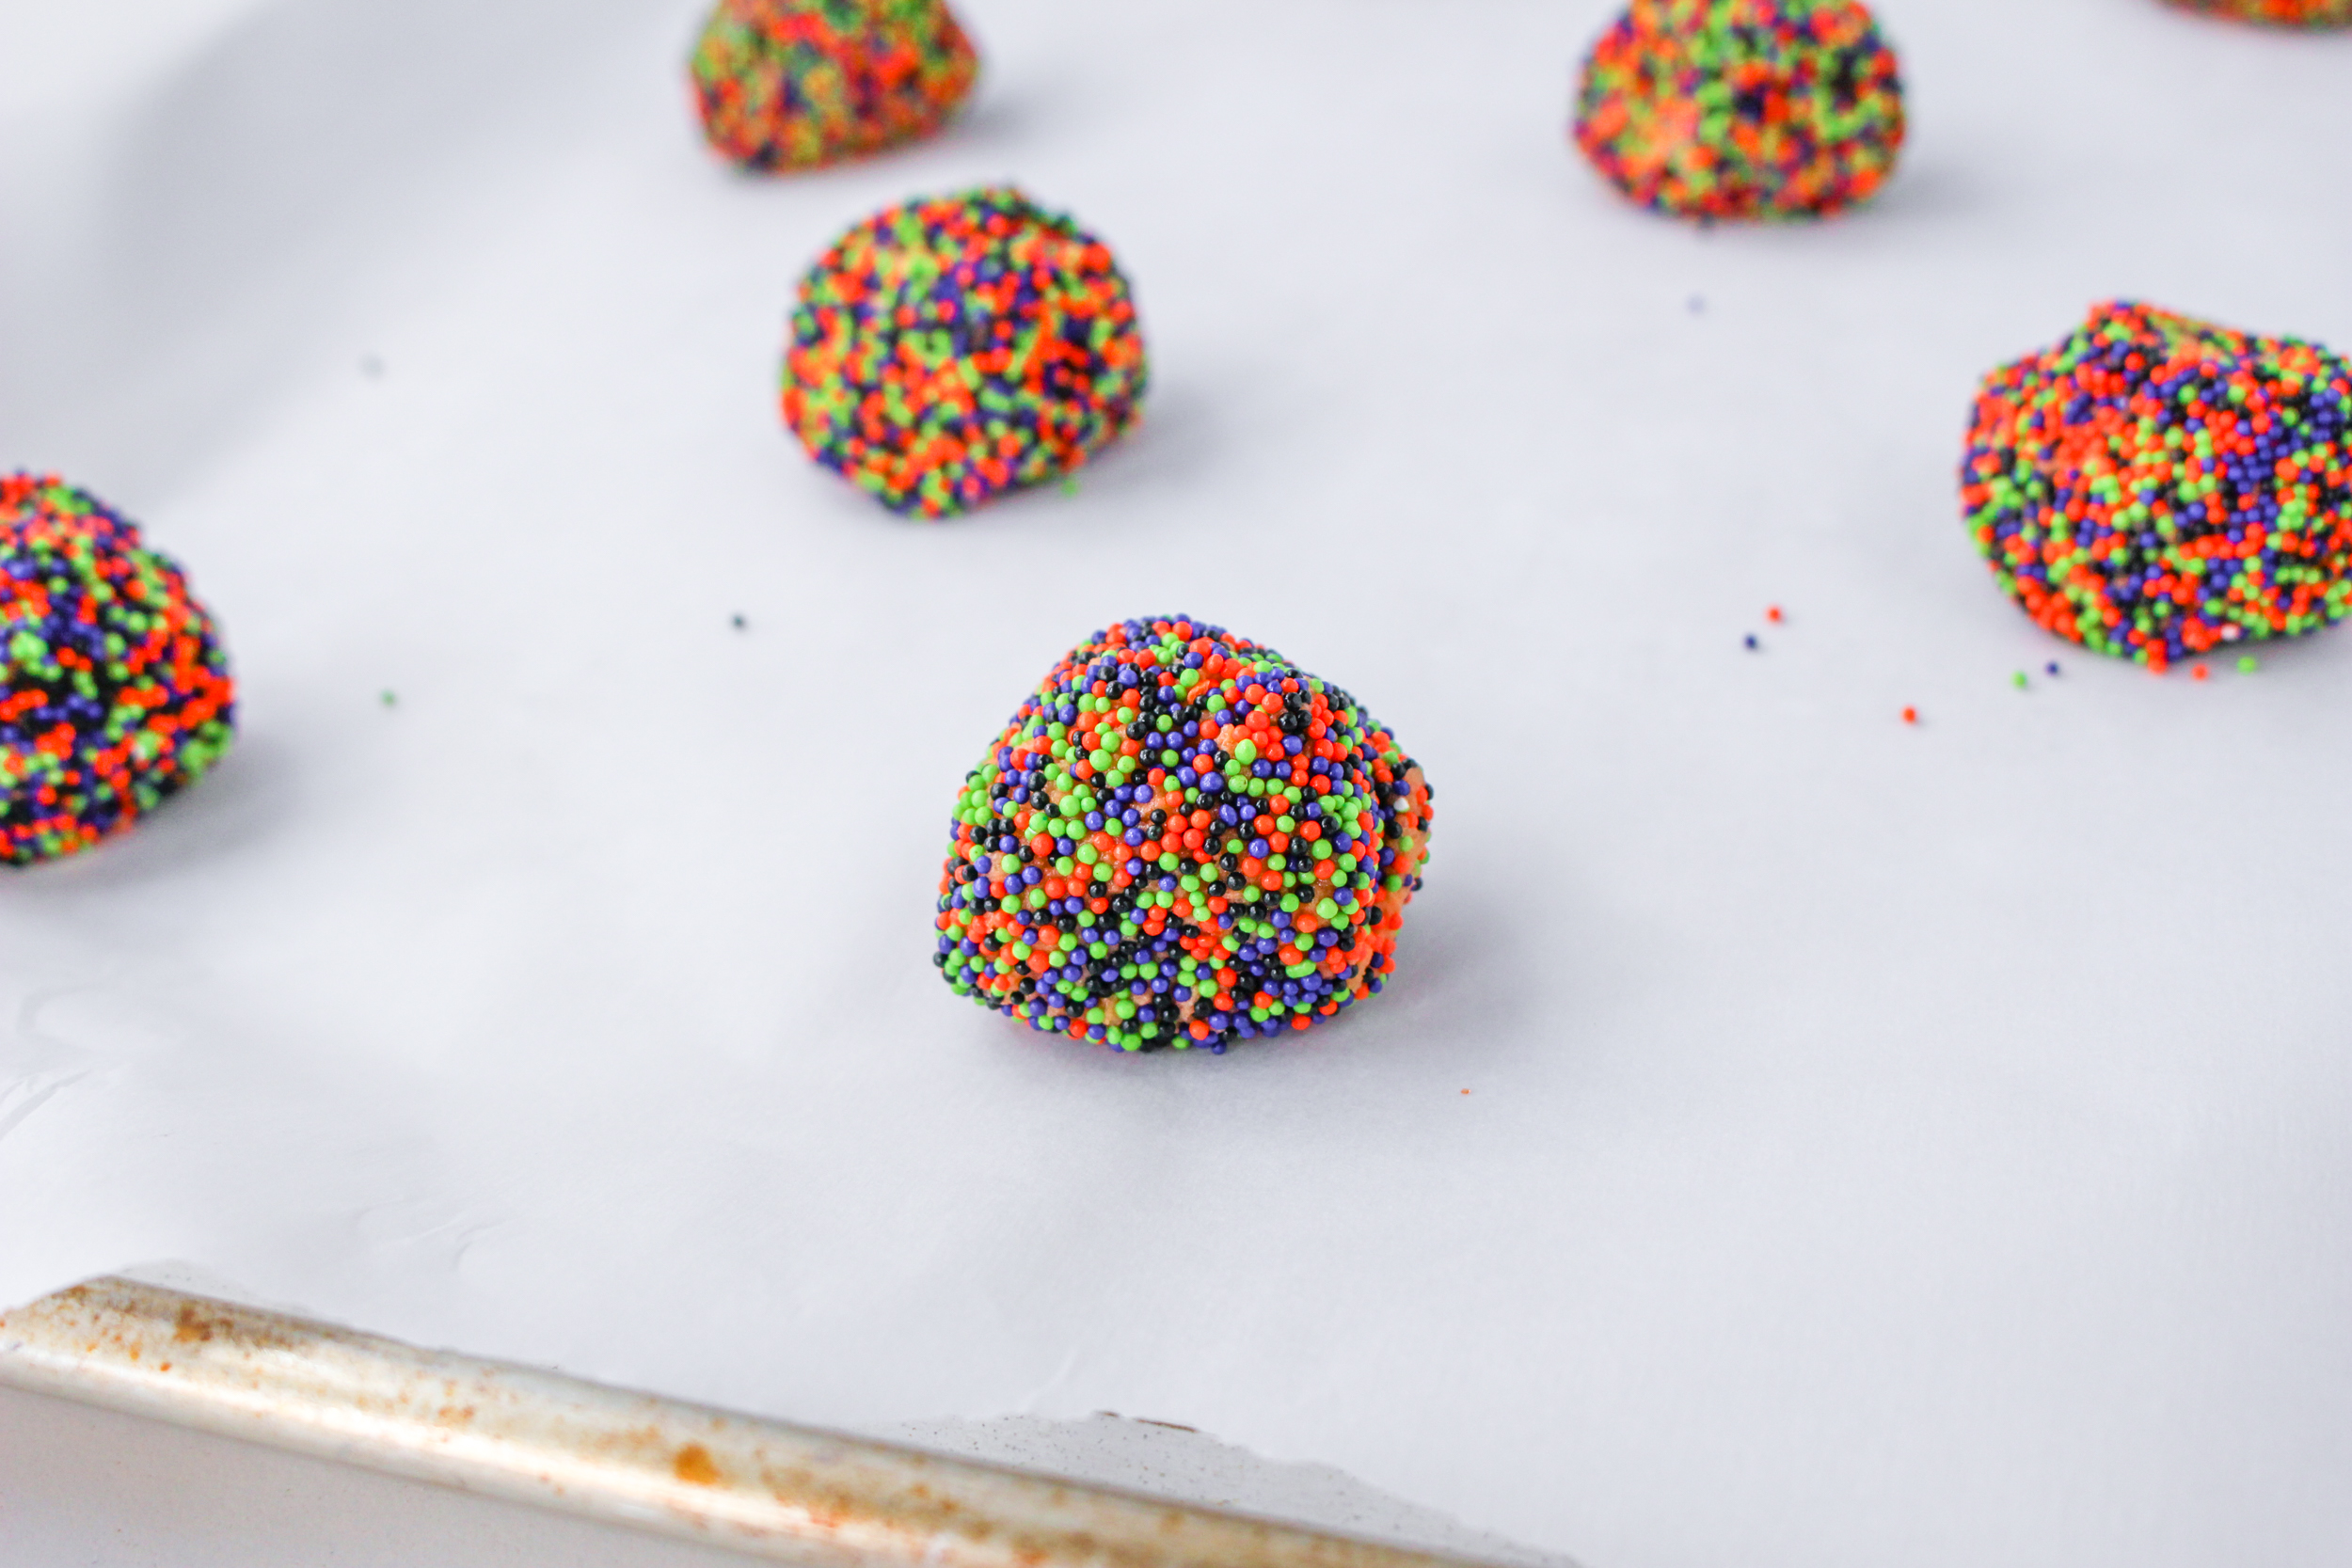 Cookie batter rolled in sprinkles scooped onto parchment paper lined cookie sheet.